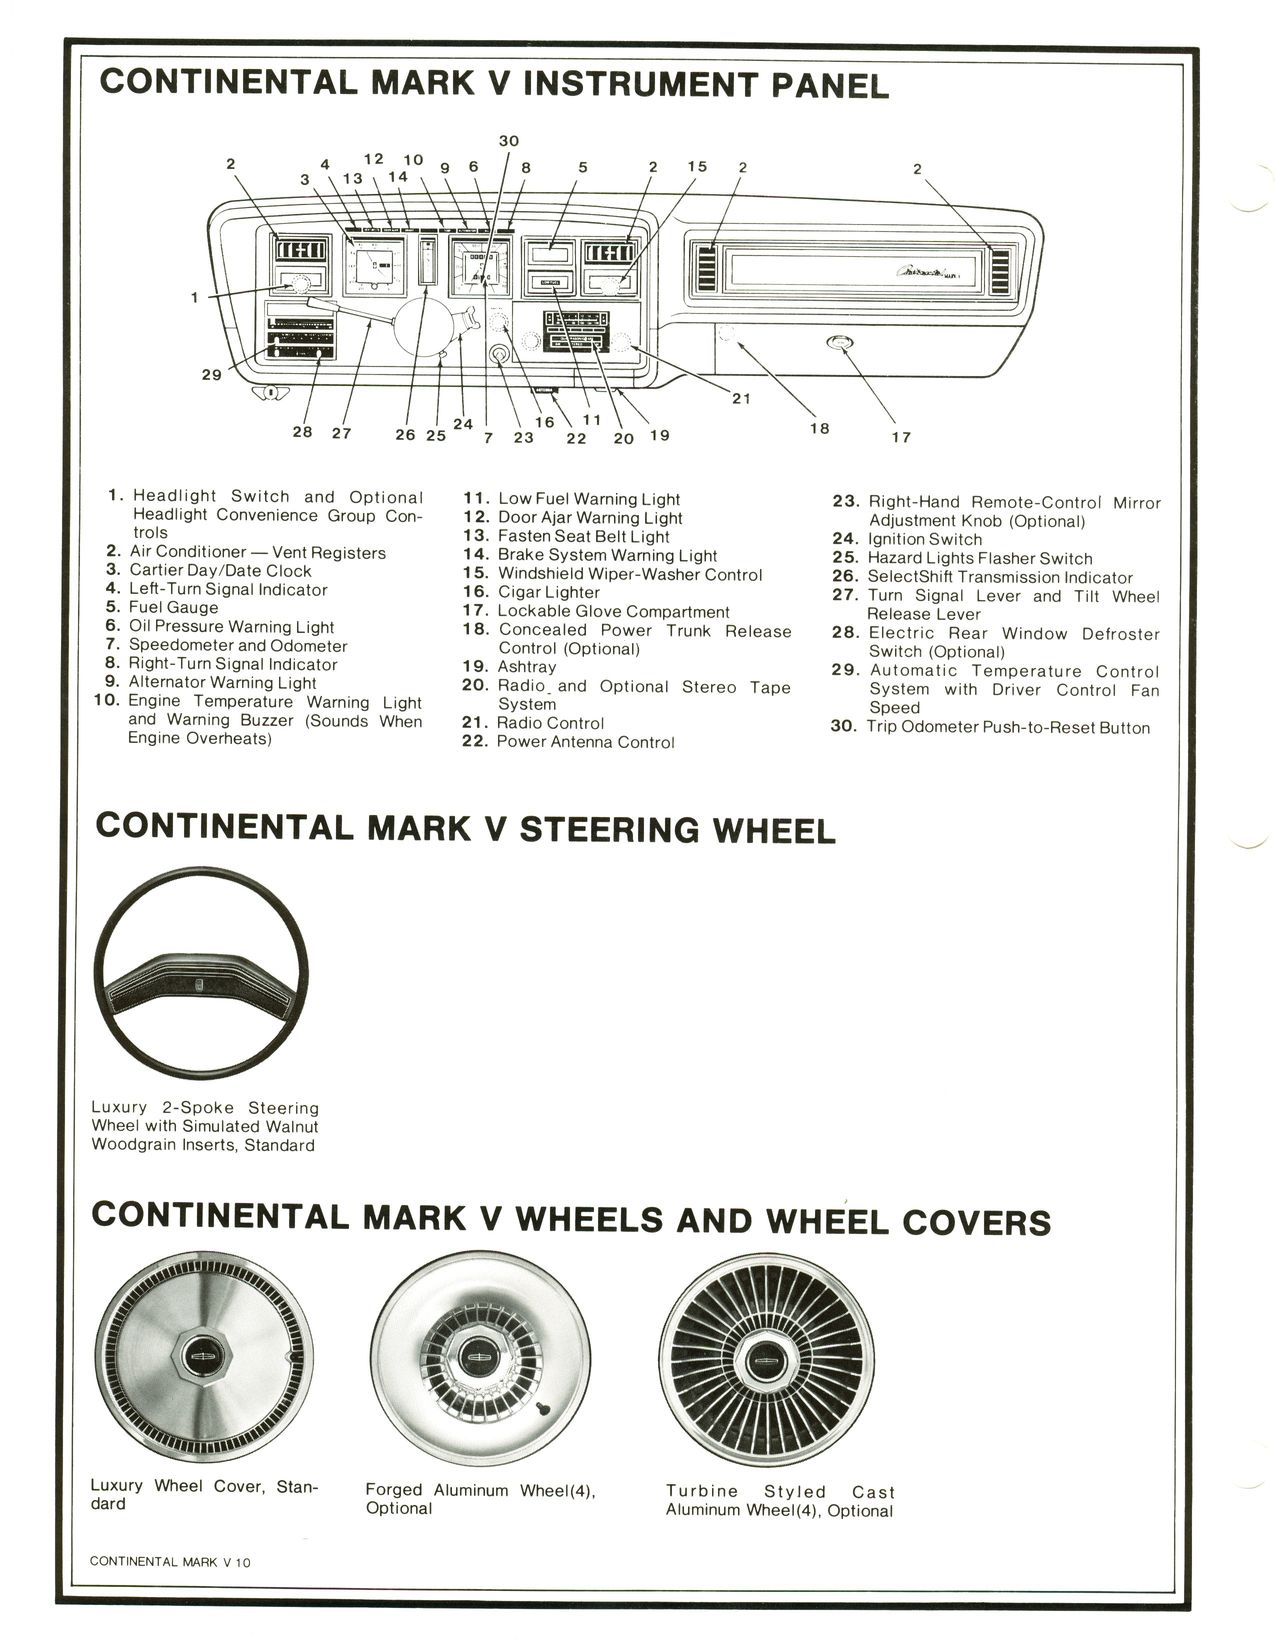 1977 Continental Product Facts Book-1-10